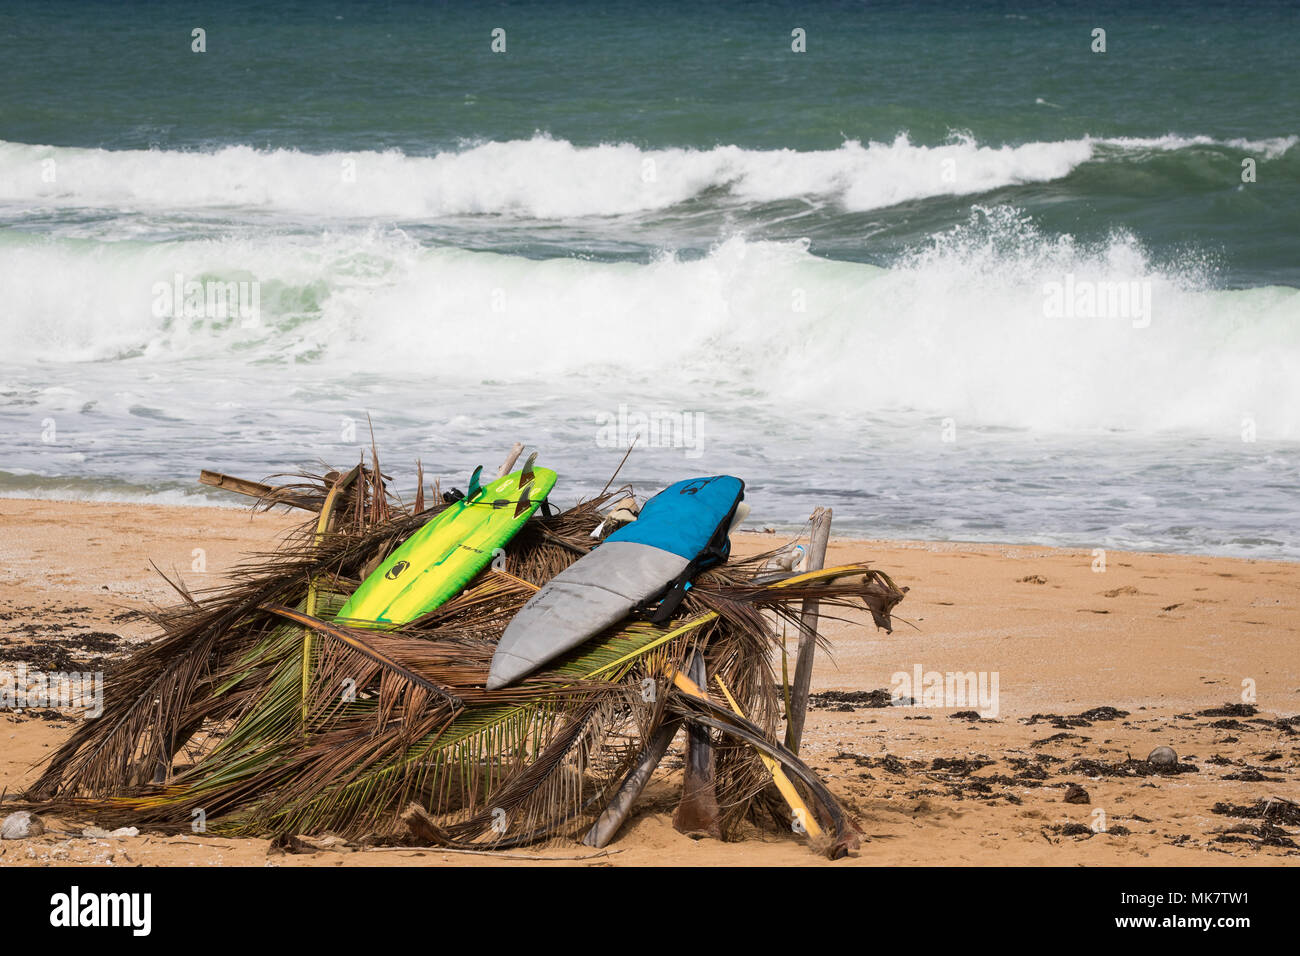 SAN JUAN, Puerto Rico — Surf boards sit ready for use during their La Comprita charitable surf competition in Aviones, Puerto Rico, Nov. 11, 2017. The competition is hosted by Agua Salá Ministries, founded by Yossua Lugo over six years ago. Agua Salá is a religious outreach program focusing on helping improve Puerto Rican communities through donations and charitable works. Members of the ministry teach regular surf lessons to children, and host the monthly competition. Proceeds from the competition’s entrance fees and merchandise sales go directly to food and clothing donations. Each month a d Stock Photo